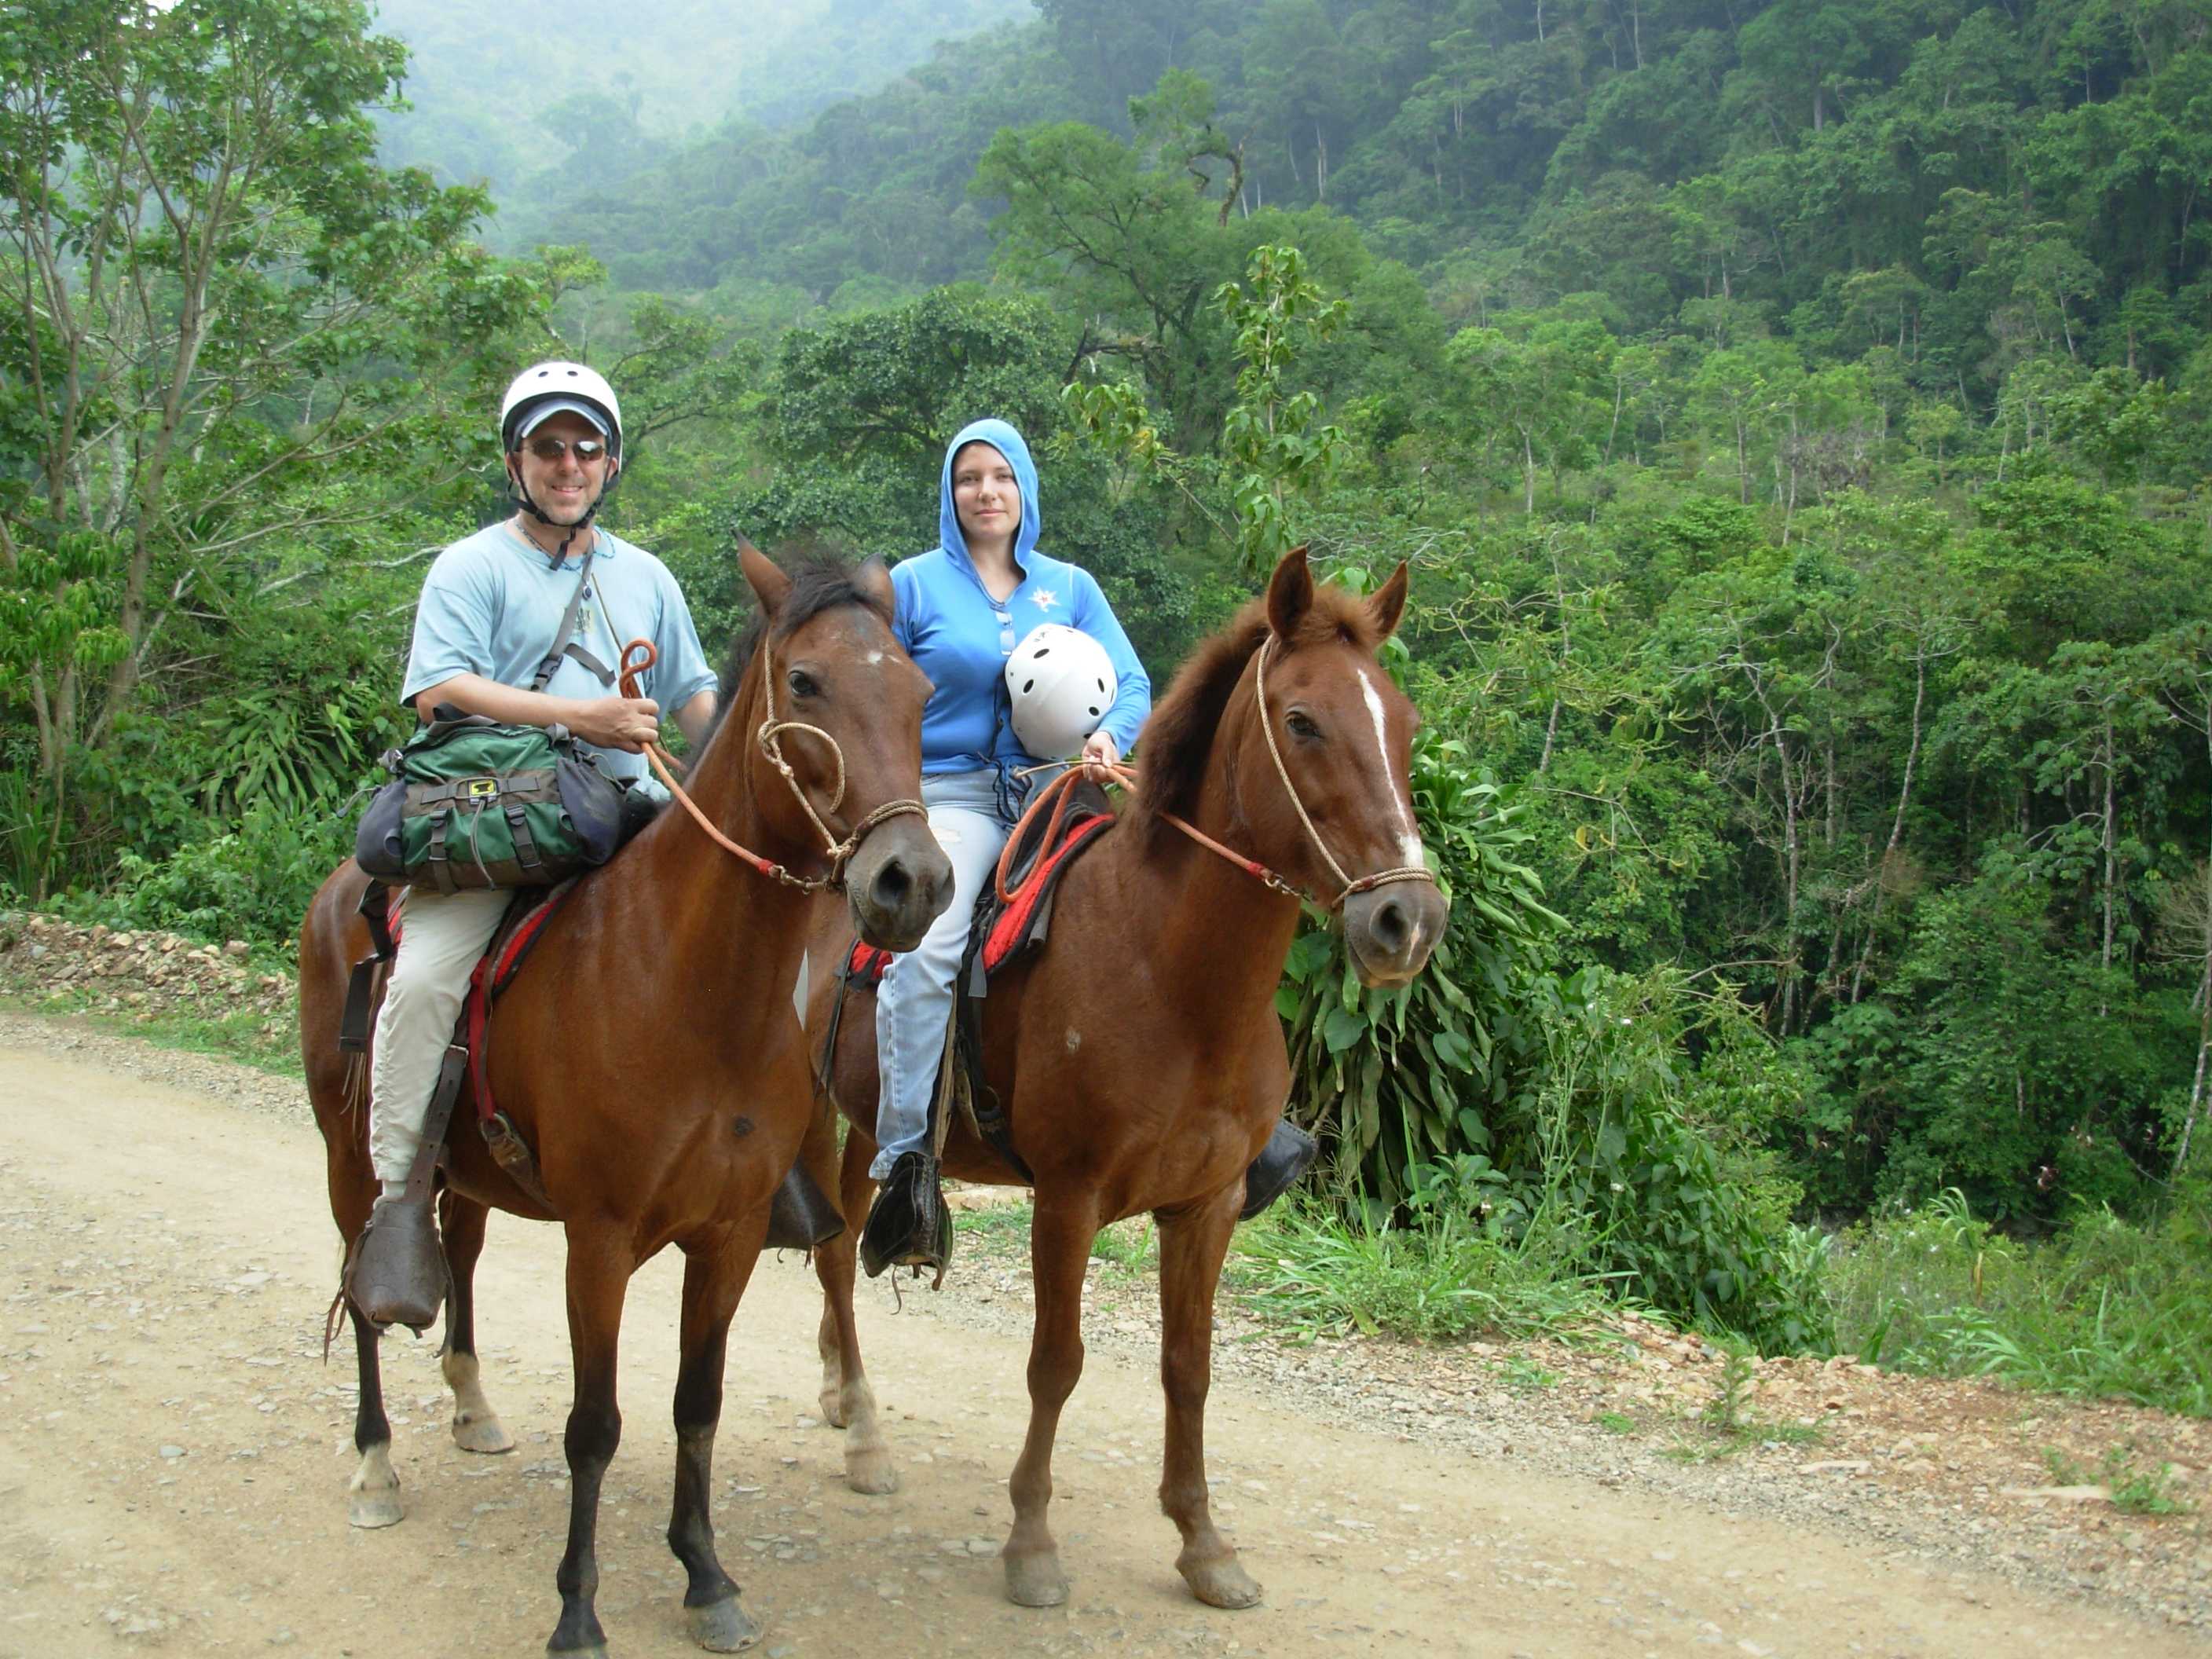 A couple horseriding in the forest